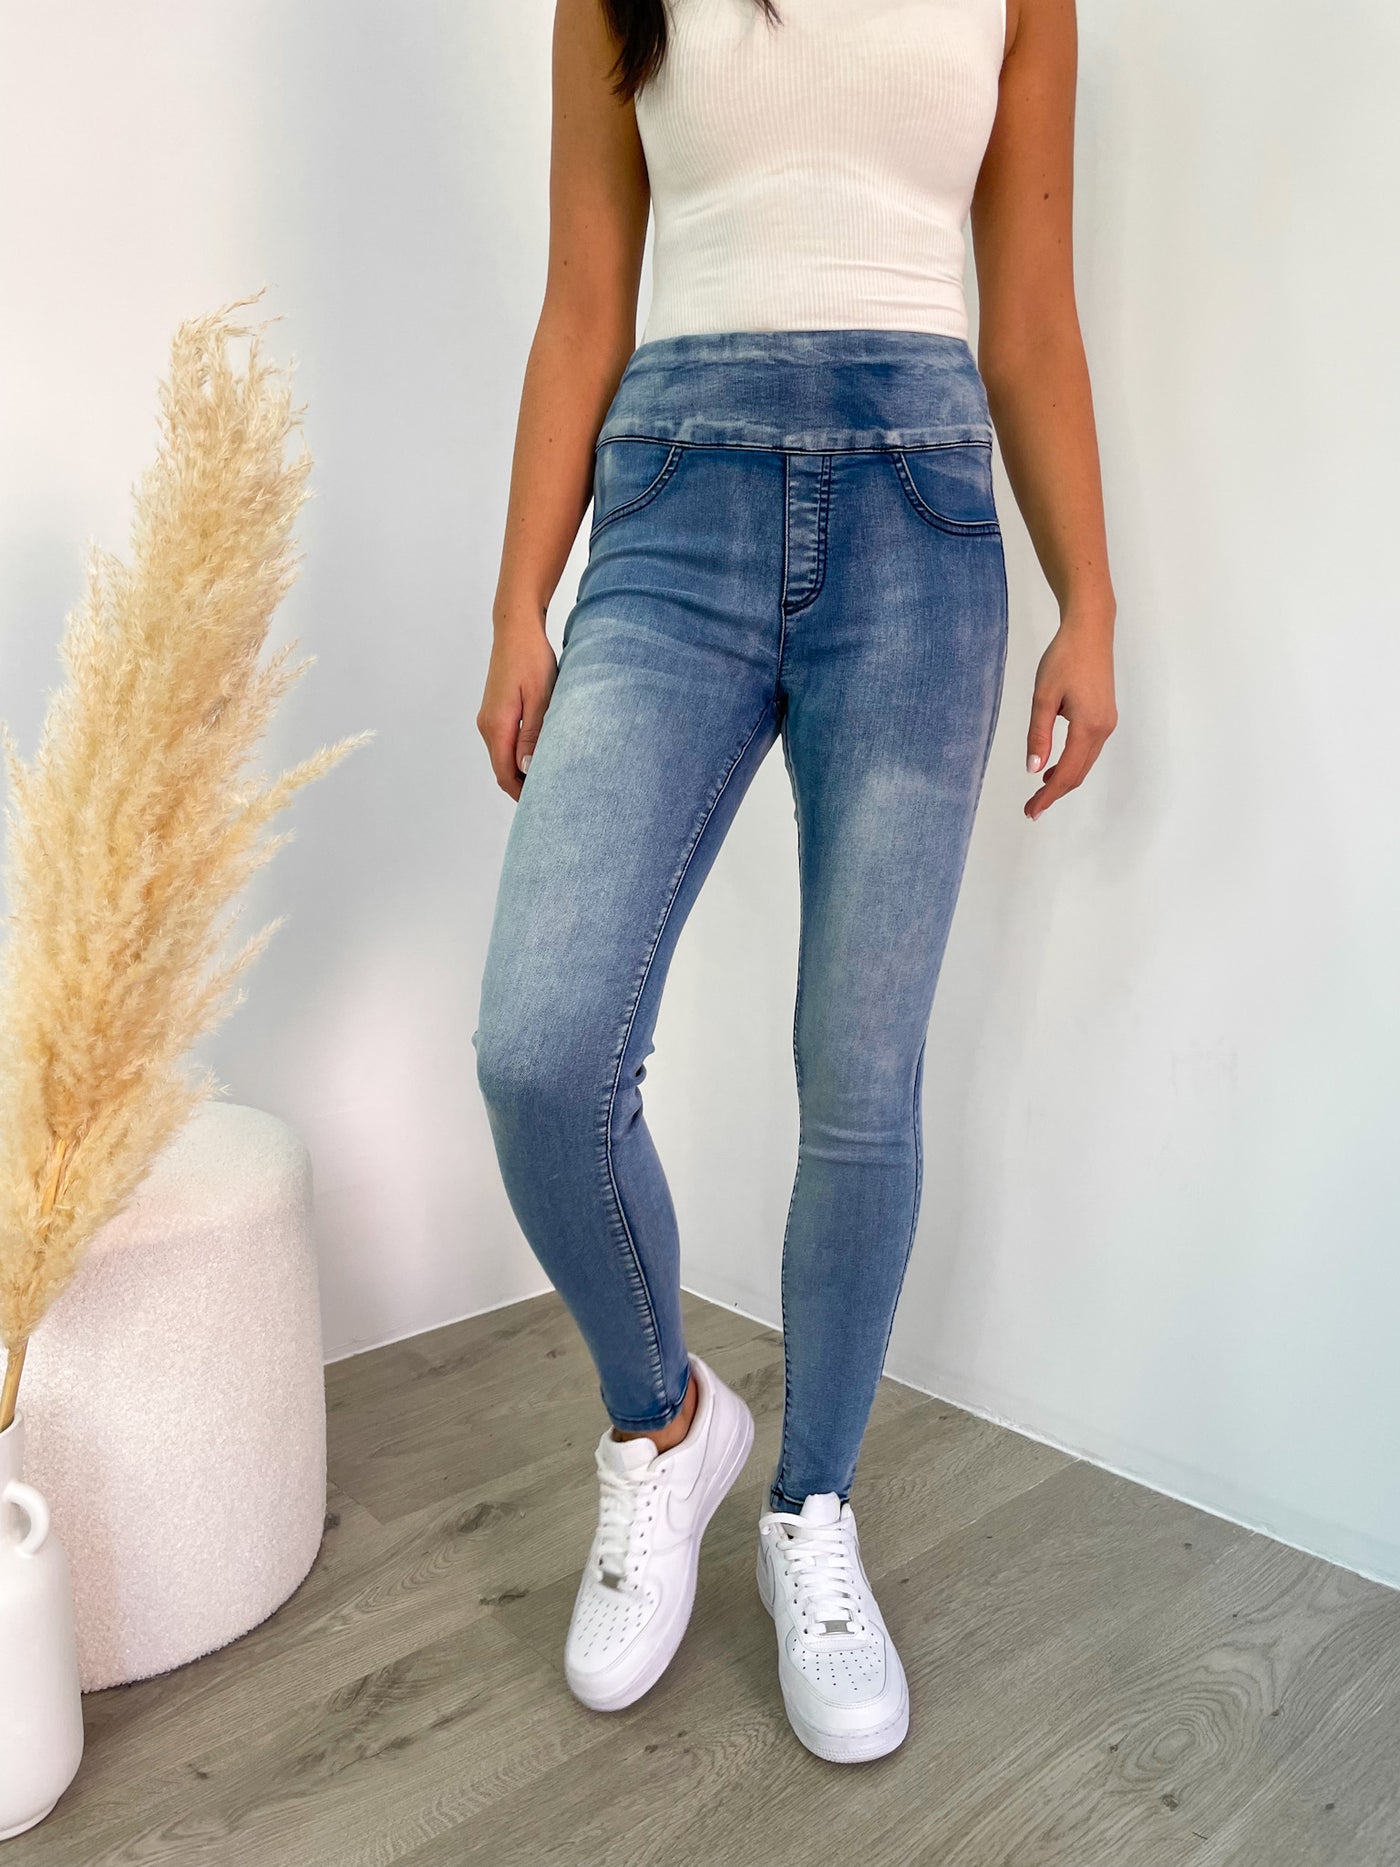 DYLAN PULL ON STRETCH JEAN - BLUE